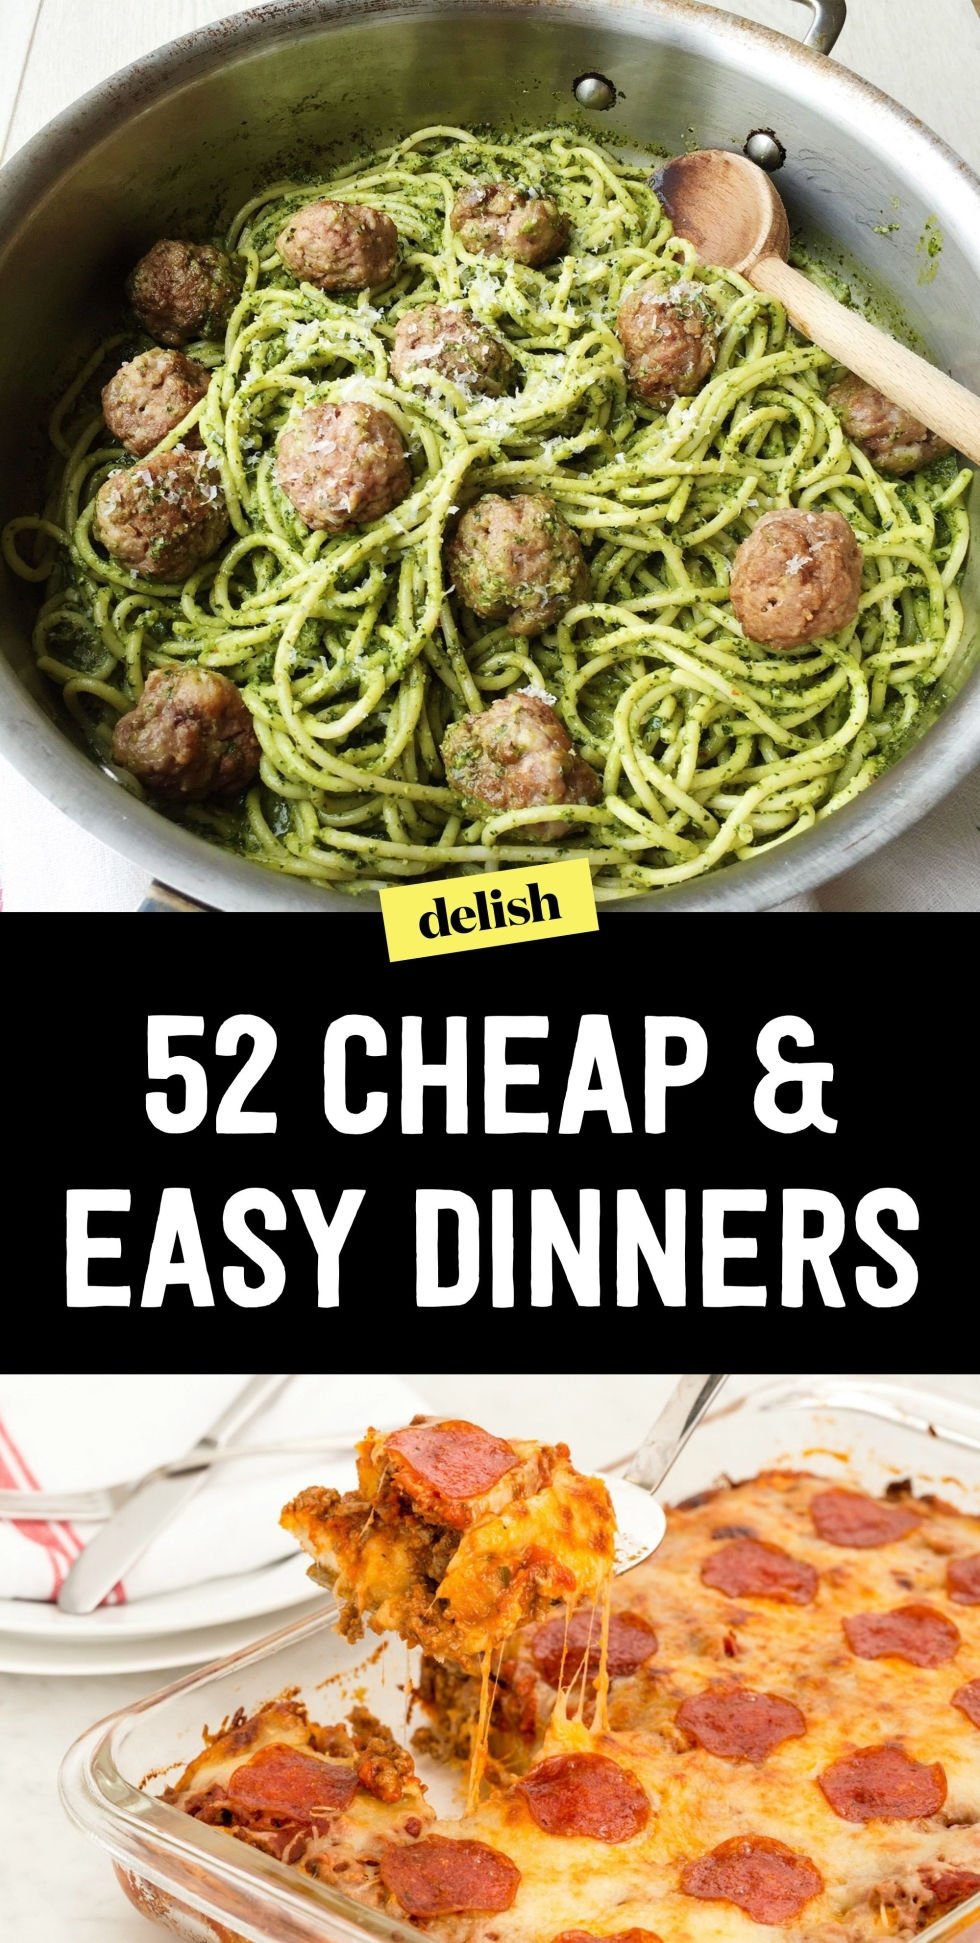 10 Lovely Inexpensive Dinner Ideas For Two download cheap easy recipes for two food photos 3 2022